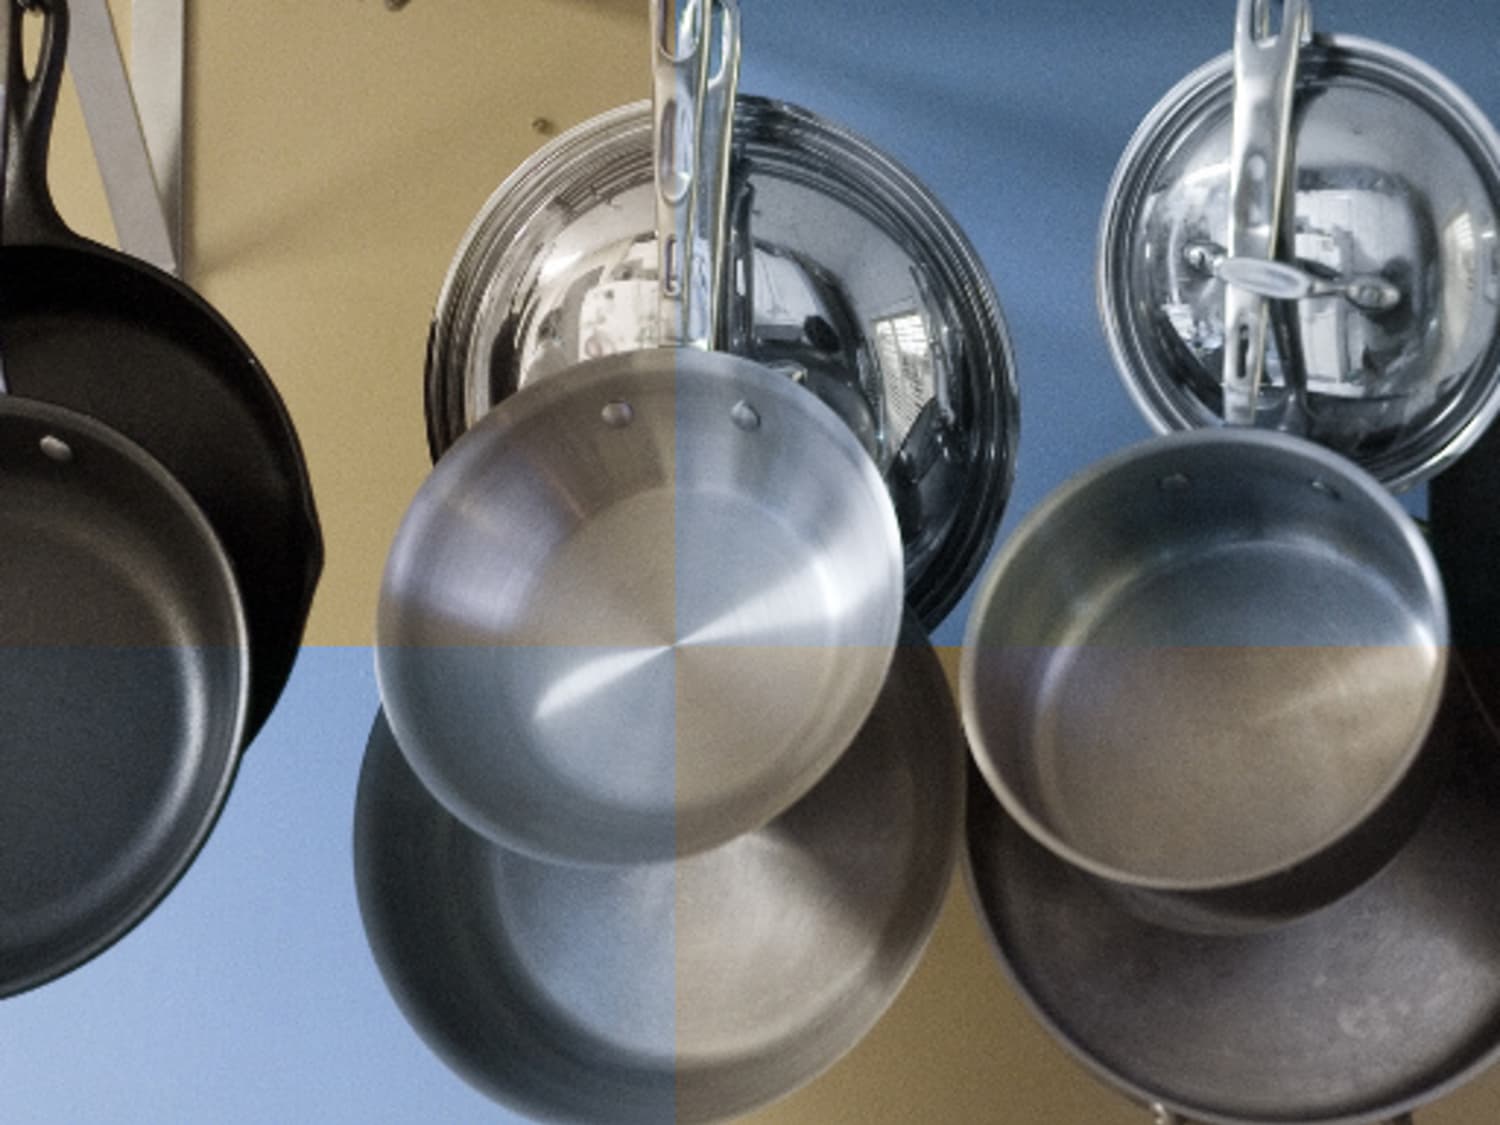 Food Science: Explaining Reactive and Non-Reactive Cookware